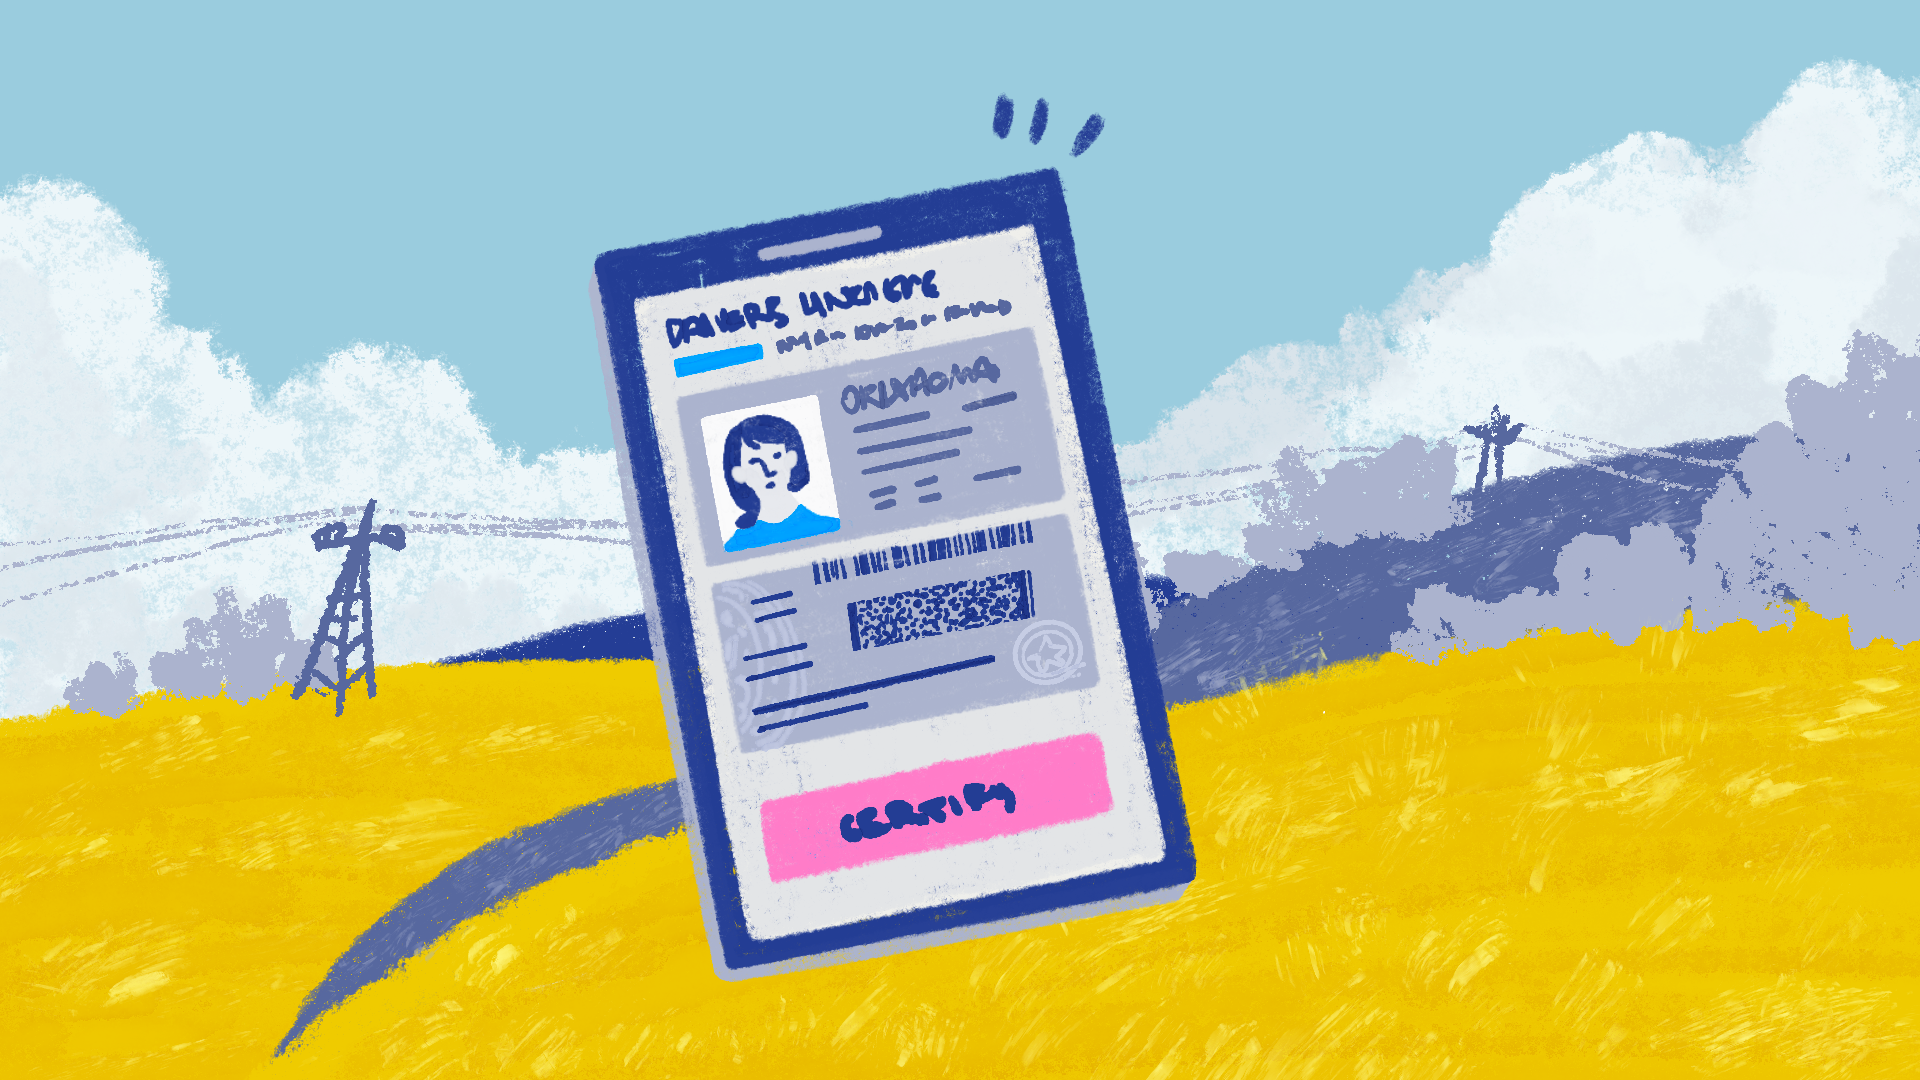 Illustration of Oklahoma plains and hills in the distance with a device containing a person's ID information